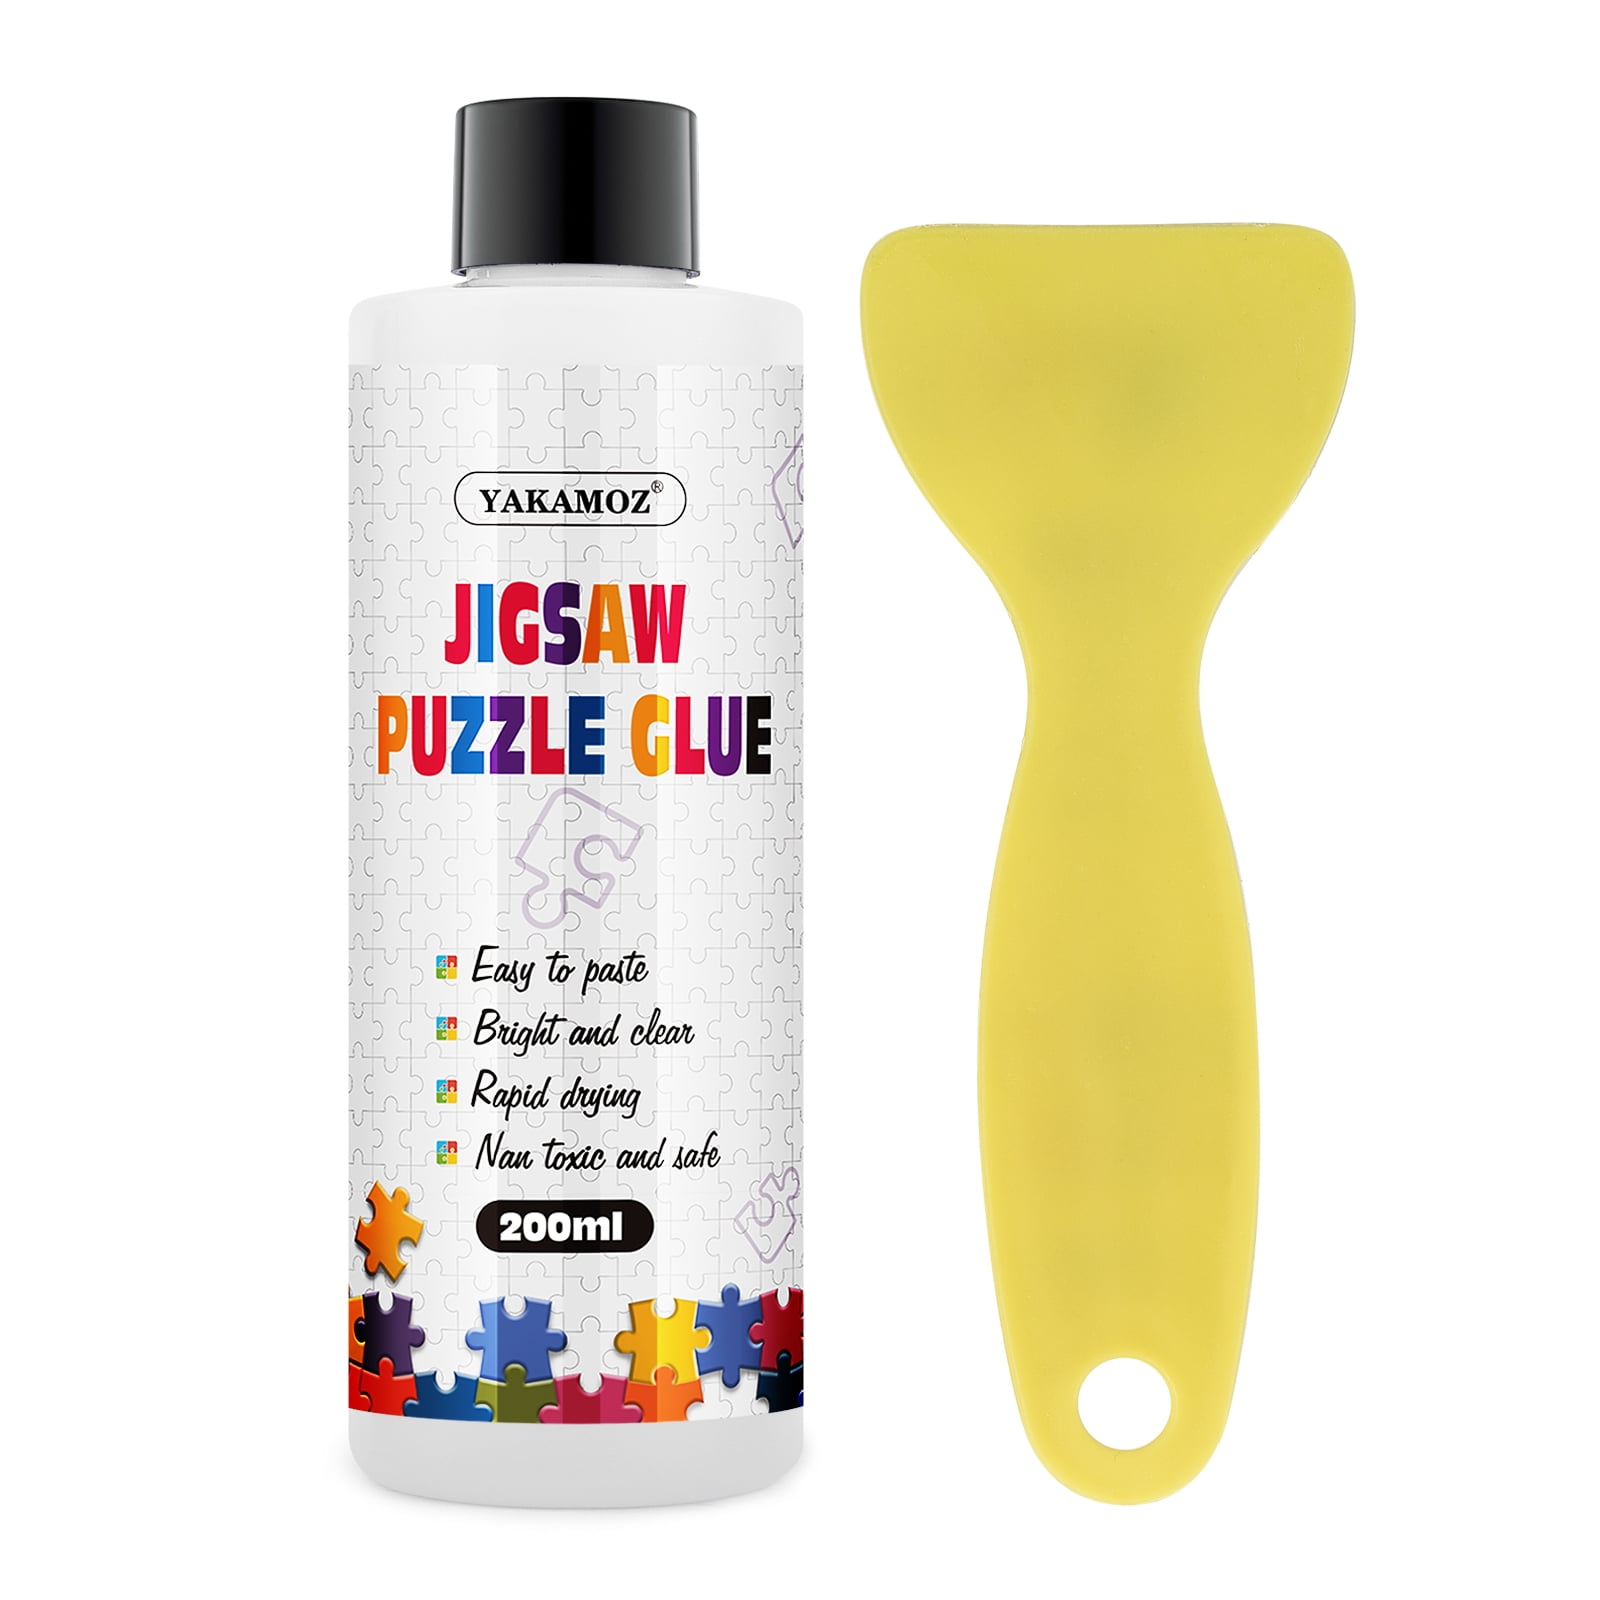 CGYUJISD Jigsaw Puzzle Glue with Applicator, 120 mL Puzzle Glue Clear,  Non-Toxic, Quick Dry Puzzle Saver for 1000/1500/3000 Pieces of Puzzle,  Include